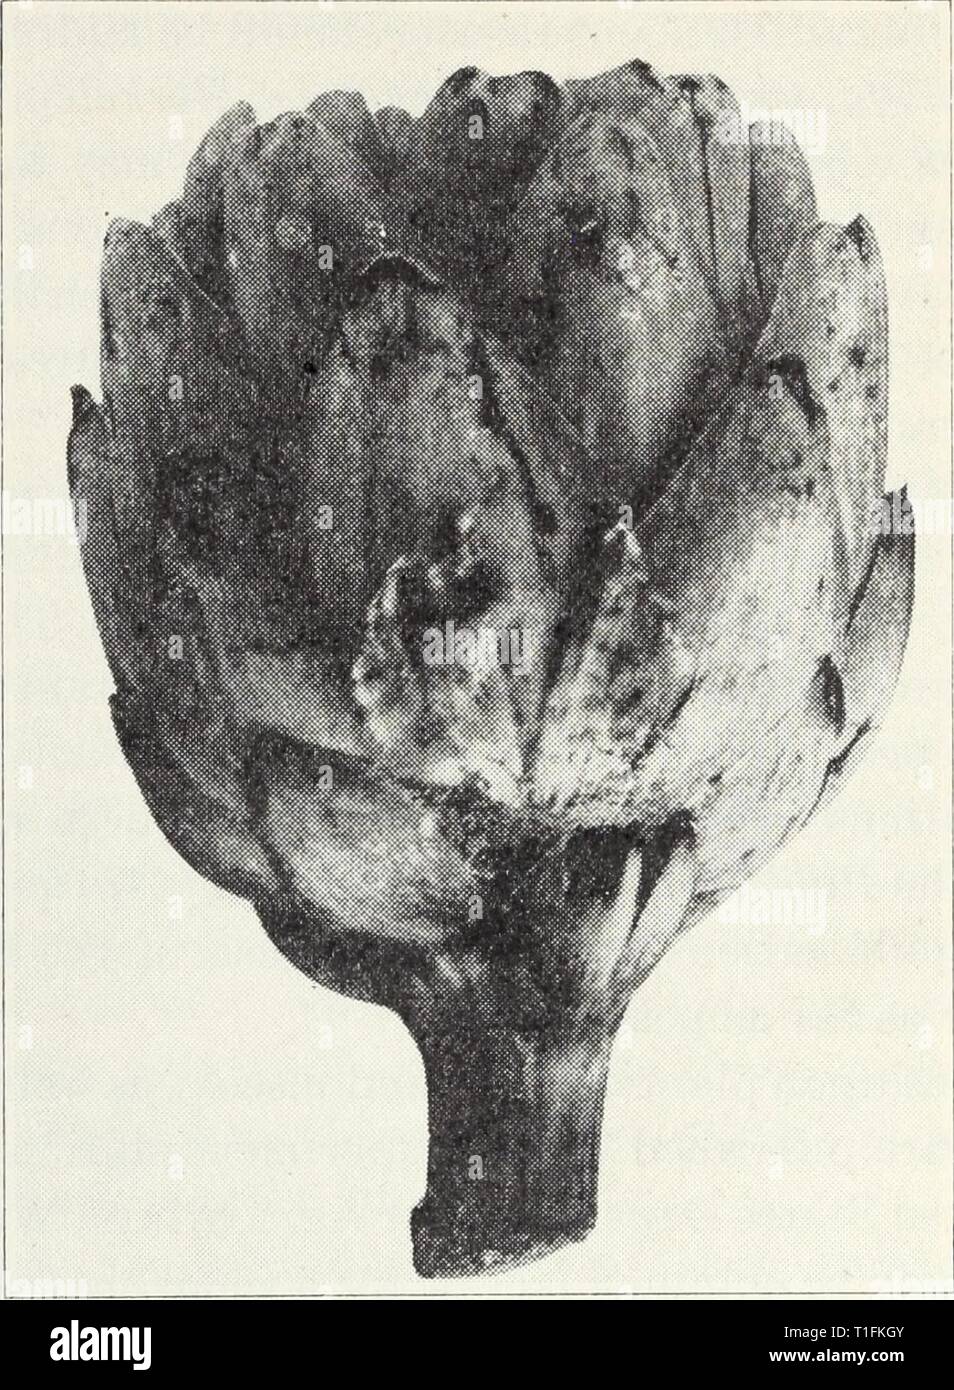 Diseases of truck crops  Diseases of truck crops / Ralph E. Smith  diseasesoftruckc119smit Year: 1940  6 California Agricultural Extension Service [Cir. ii9 DISEASES BY CROPS ARTICHOKE (GLOBE)' Bud Rot, Mold.—The common gray-mold fungus, Botrytis cinerea, sometimes attacks artichokes in the field or in shipment, just as it affects heads of lettuce, bunches of grapes, ripe fruit, and other fleshy material. The bud scales are rotted and covered with a brownish-gray, dusty    Fig. 1.—Bud rot of artichoke. growth of mold (fig. 1). This disease is greatly favored by rain, fog, or high humidity. The Stock Photo